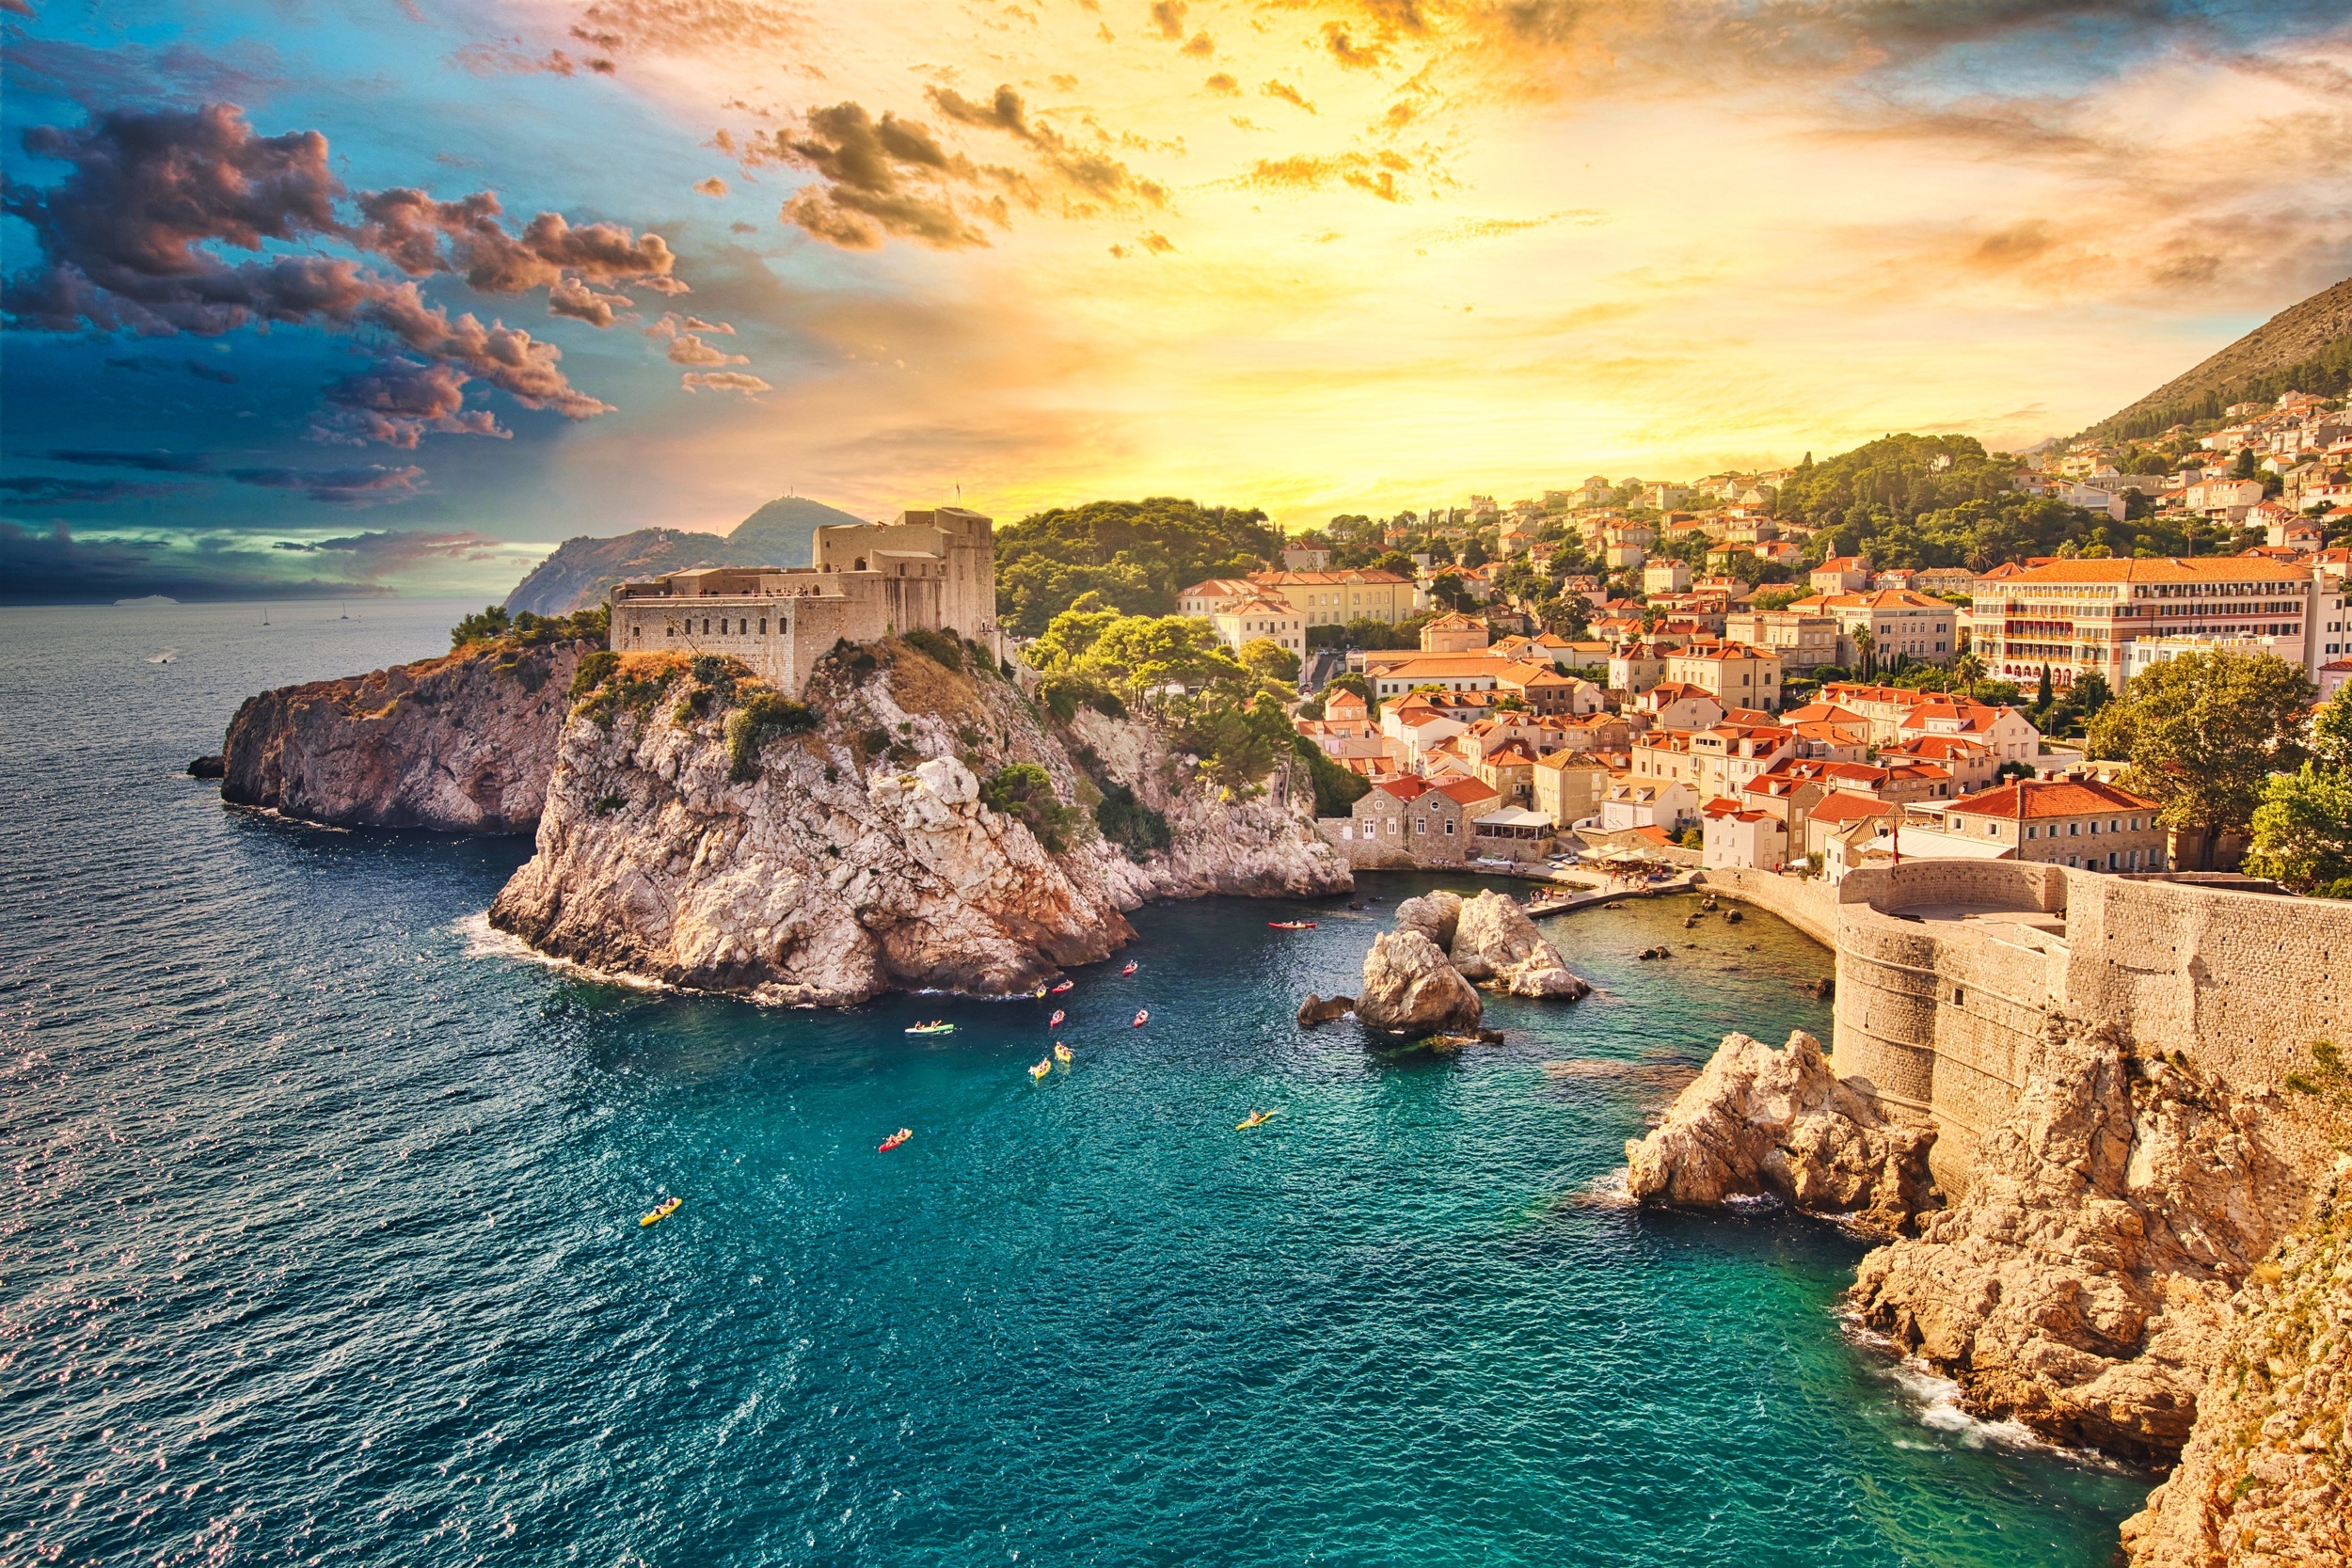 <p>This list, of course, couldn’t have been completed without mentioning arguably the most famous destination in the Balkans. <em>Game of Thrones</em> ensured the city is now on every traveler’s wishlist, so while you won’t ever have Dubrovnik to yourself, it’s still worth a visit. Enjoy views from atop the city walls, kayak around the hidden coves, and have dinner in the magical Old Town. </p><p>You may also like: <a href='https://www.yardbarker.com/lifestyle/articles/25_cooking_hacks_you_wont_believe_you_didnt_already_know_030624/s1__34563020'>25 cooking hacks you won’t believe you didn’t already know</a></p>